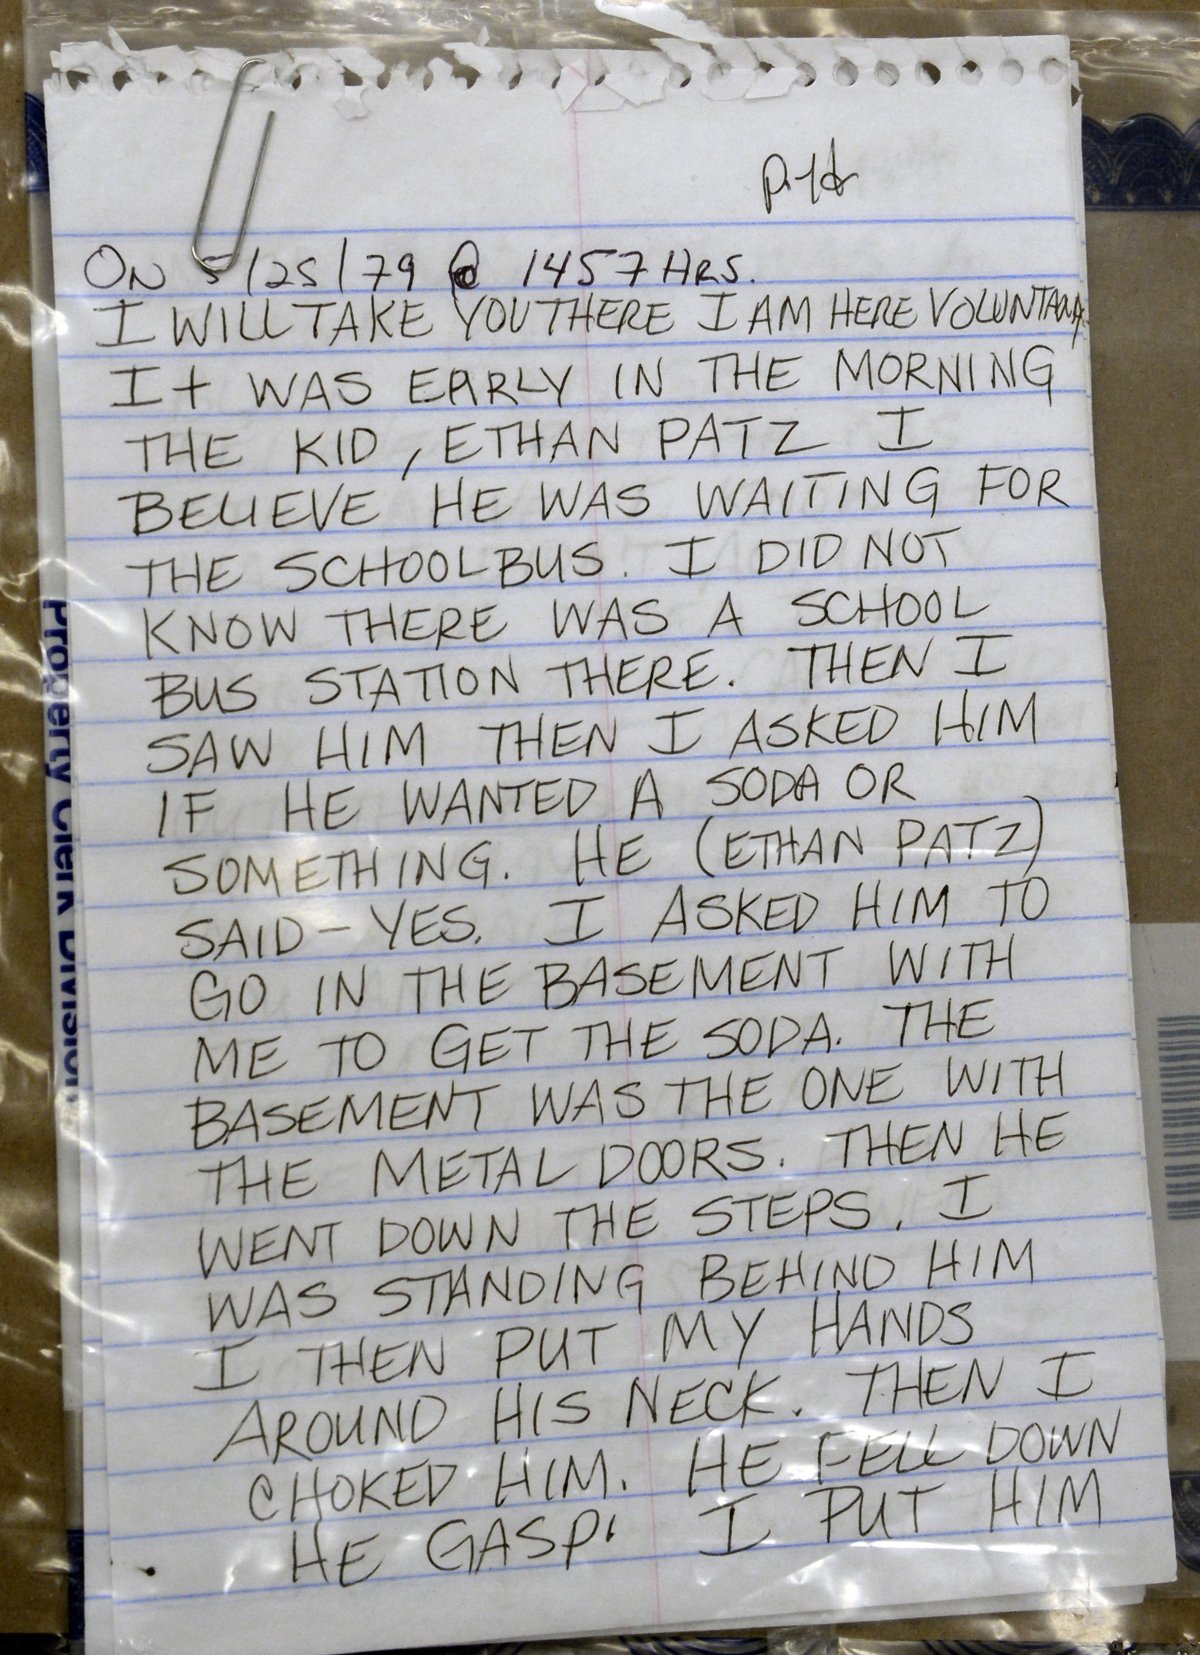 A confession written by Pedro Hernandez that was entered into evidence in court. Courtesy Manhattan D.A.’s Office